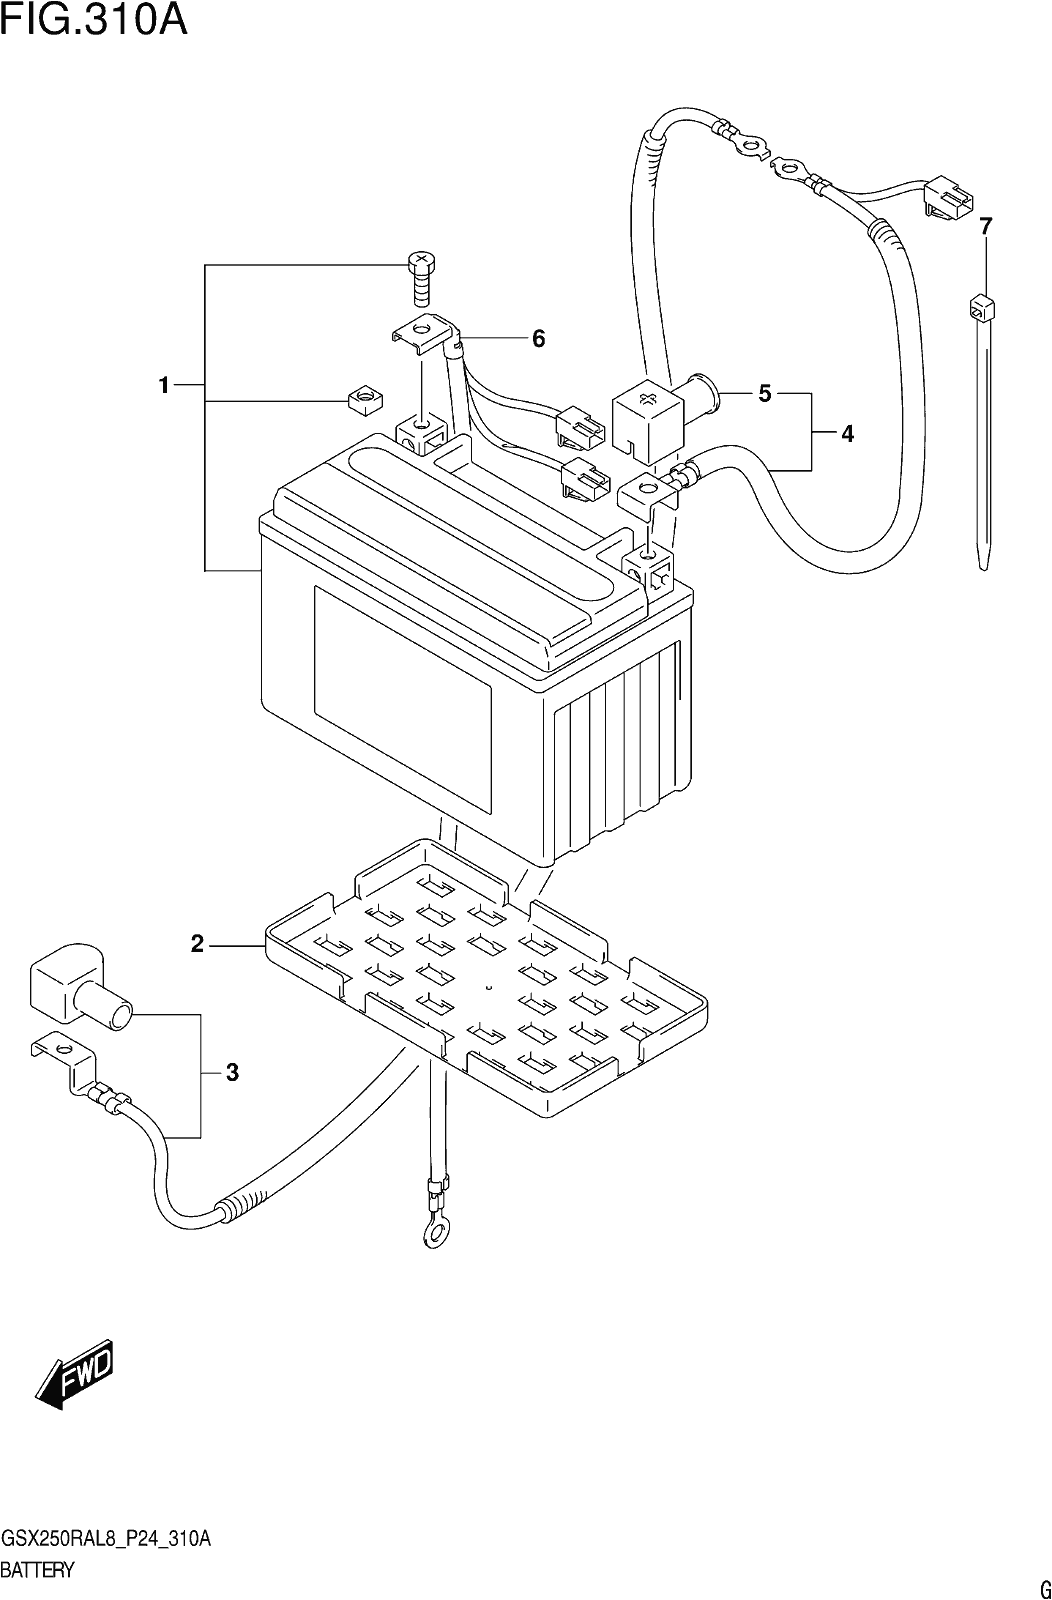 Fig.310a Battery